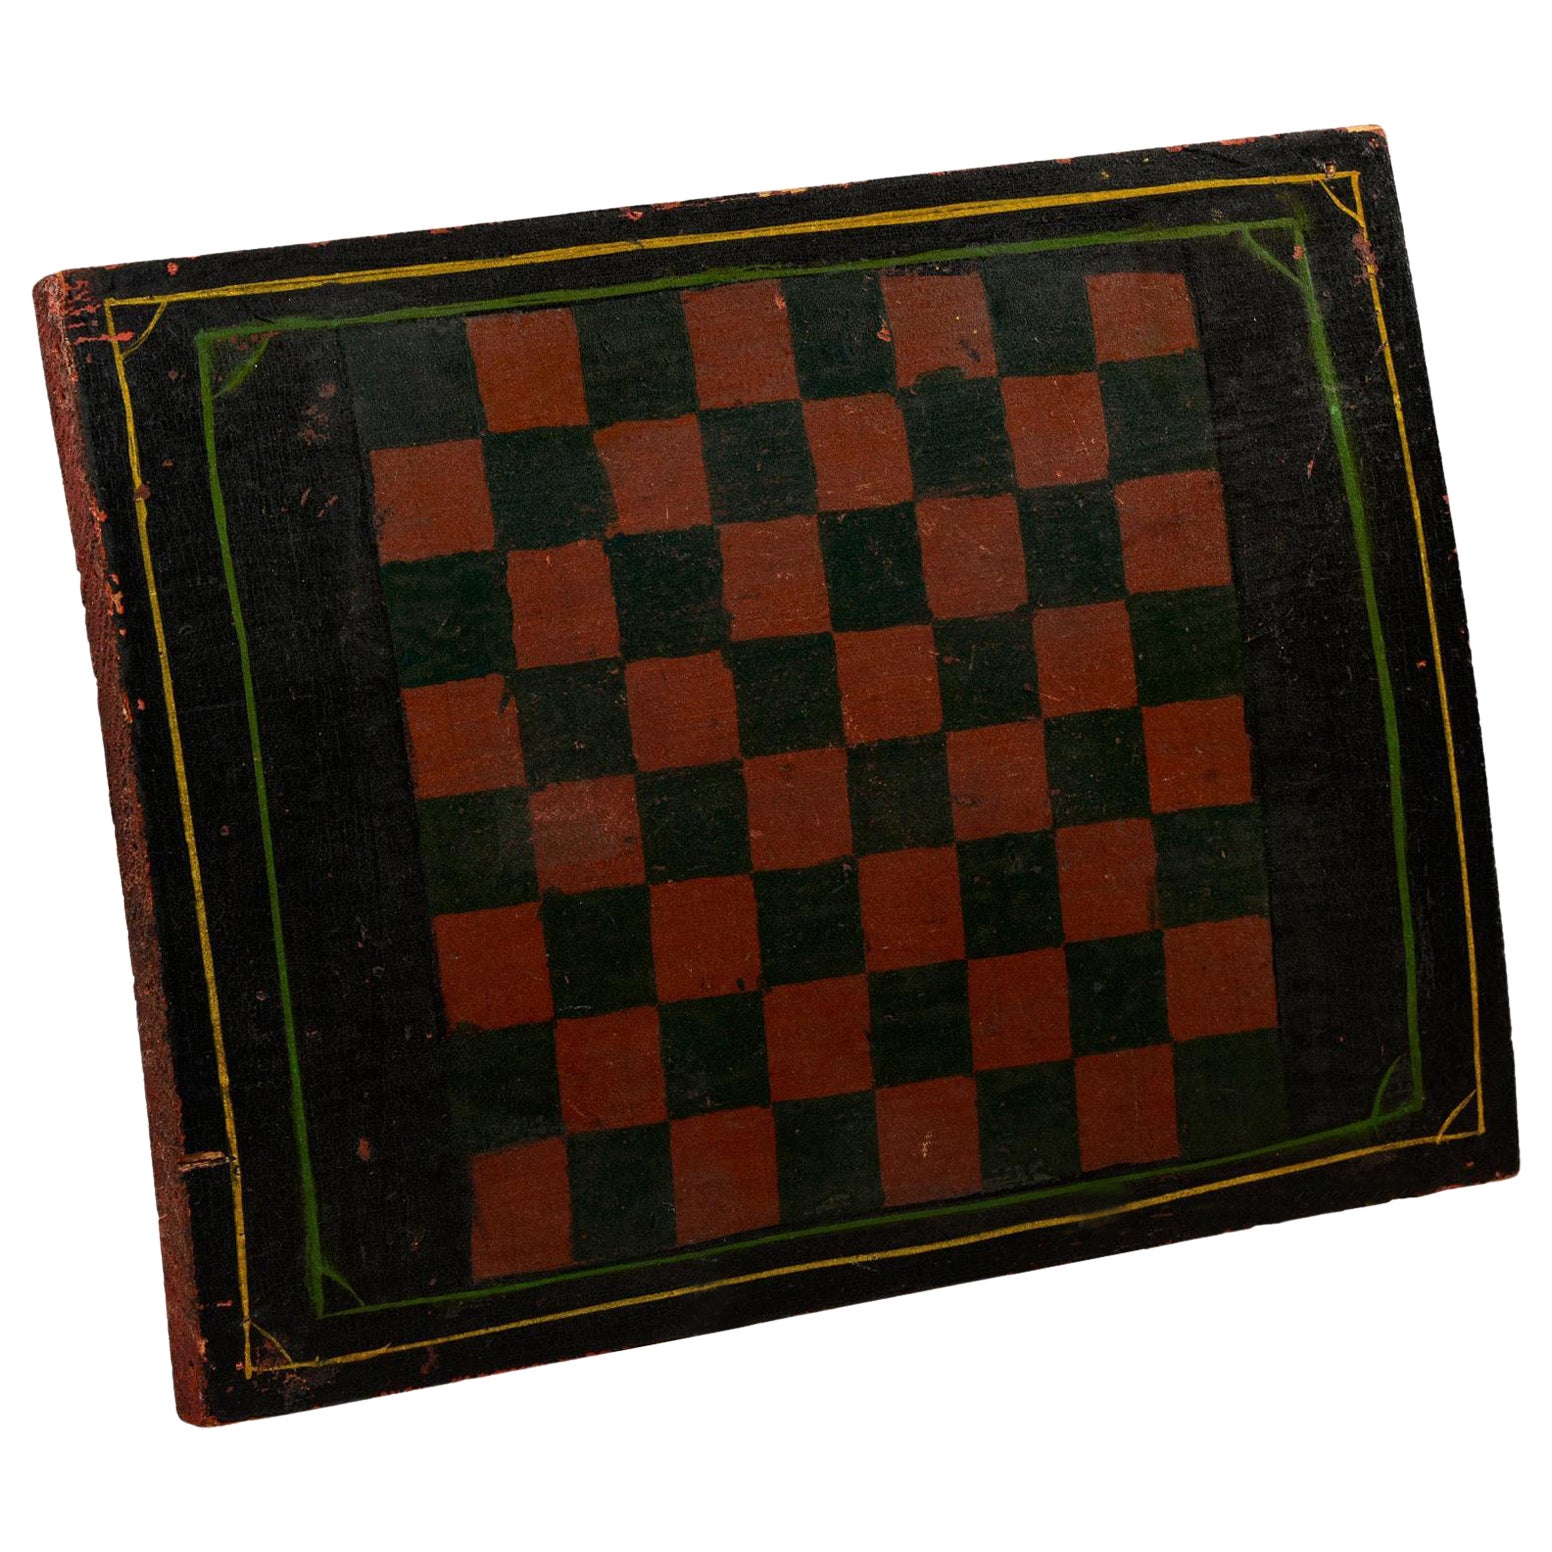 Early 20th C Game Board with Orig Painted Black and Red Squares